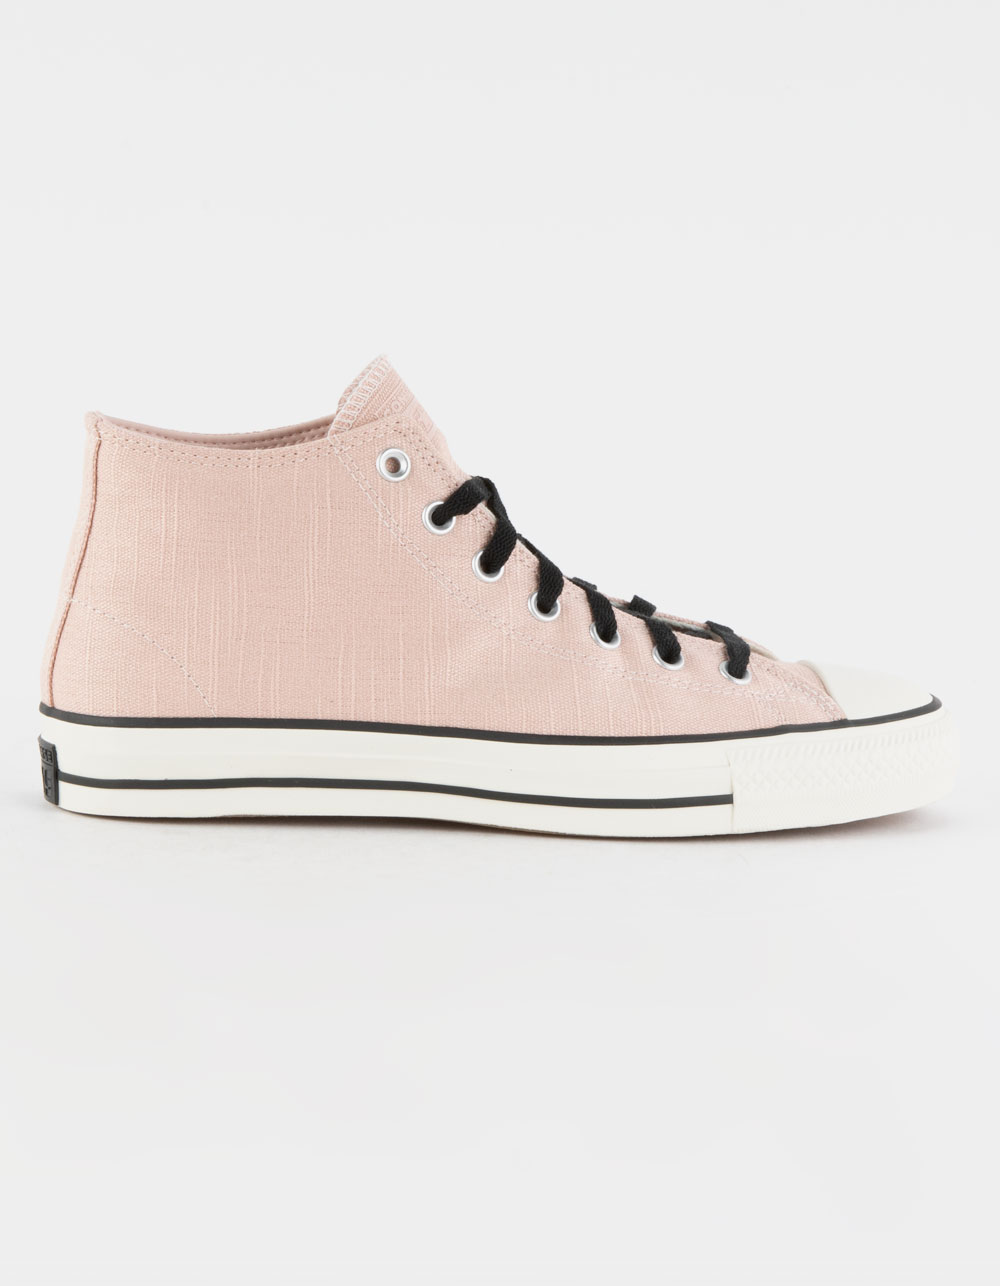 CONVERSE Chuck Taylor All Star Pro Mid Hemp Shoes - DUSTY PINK